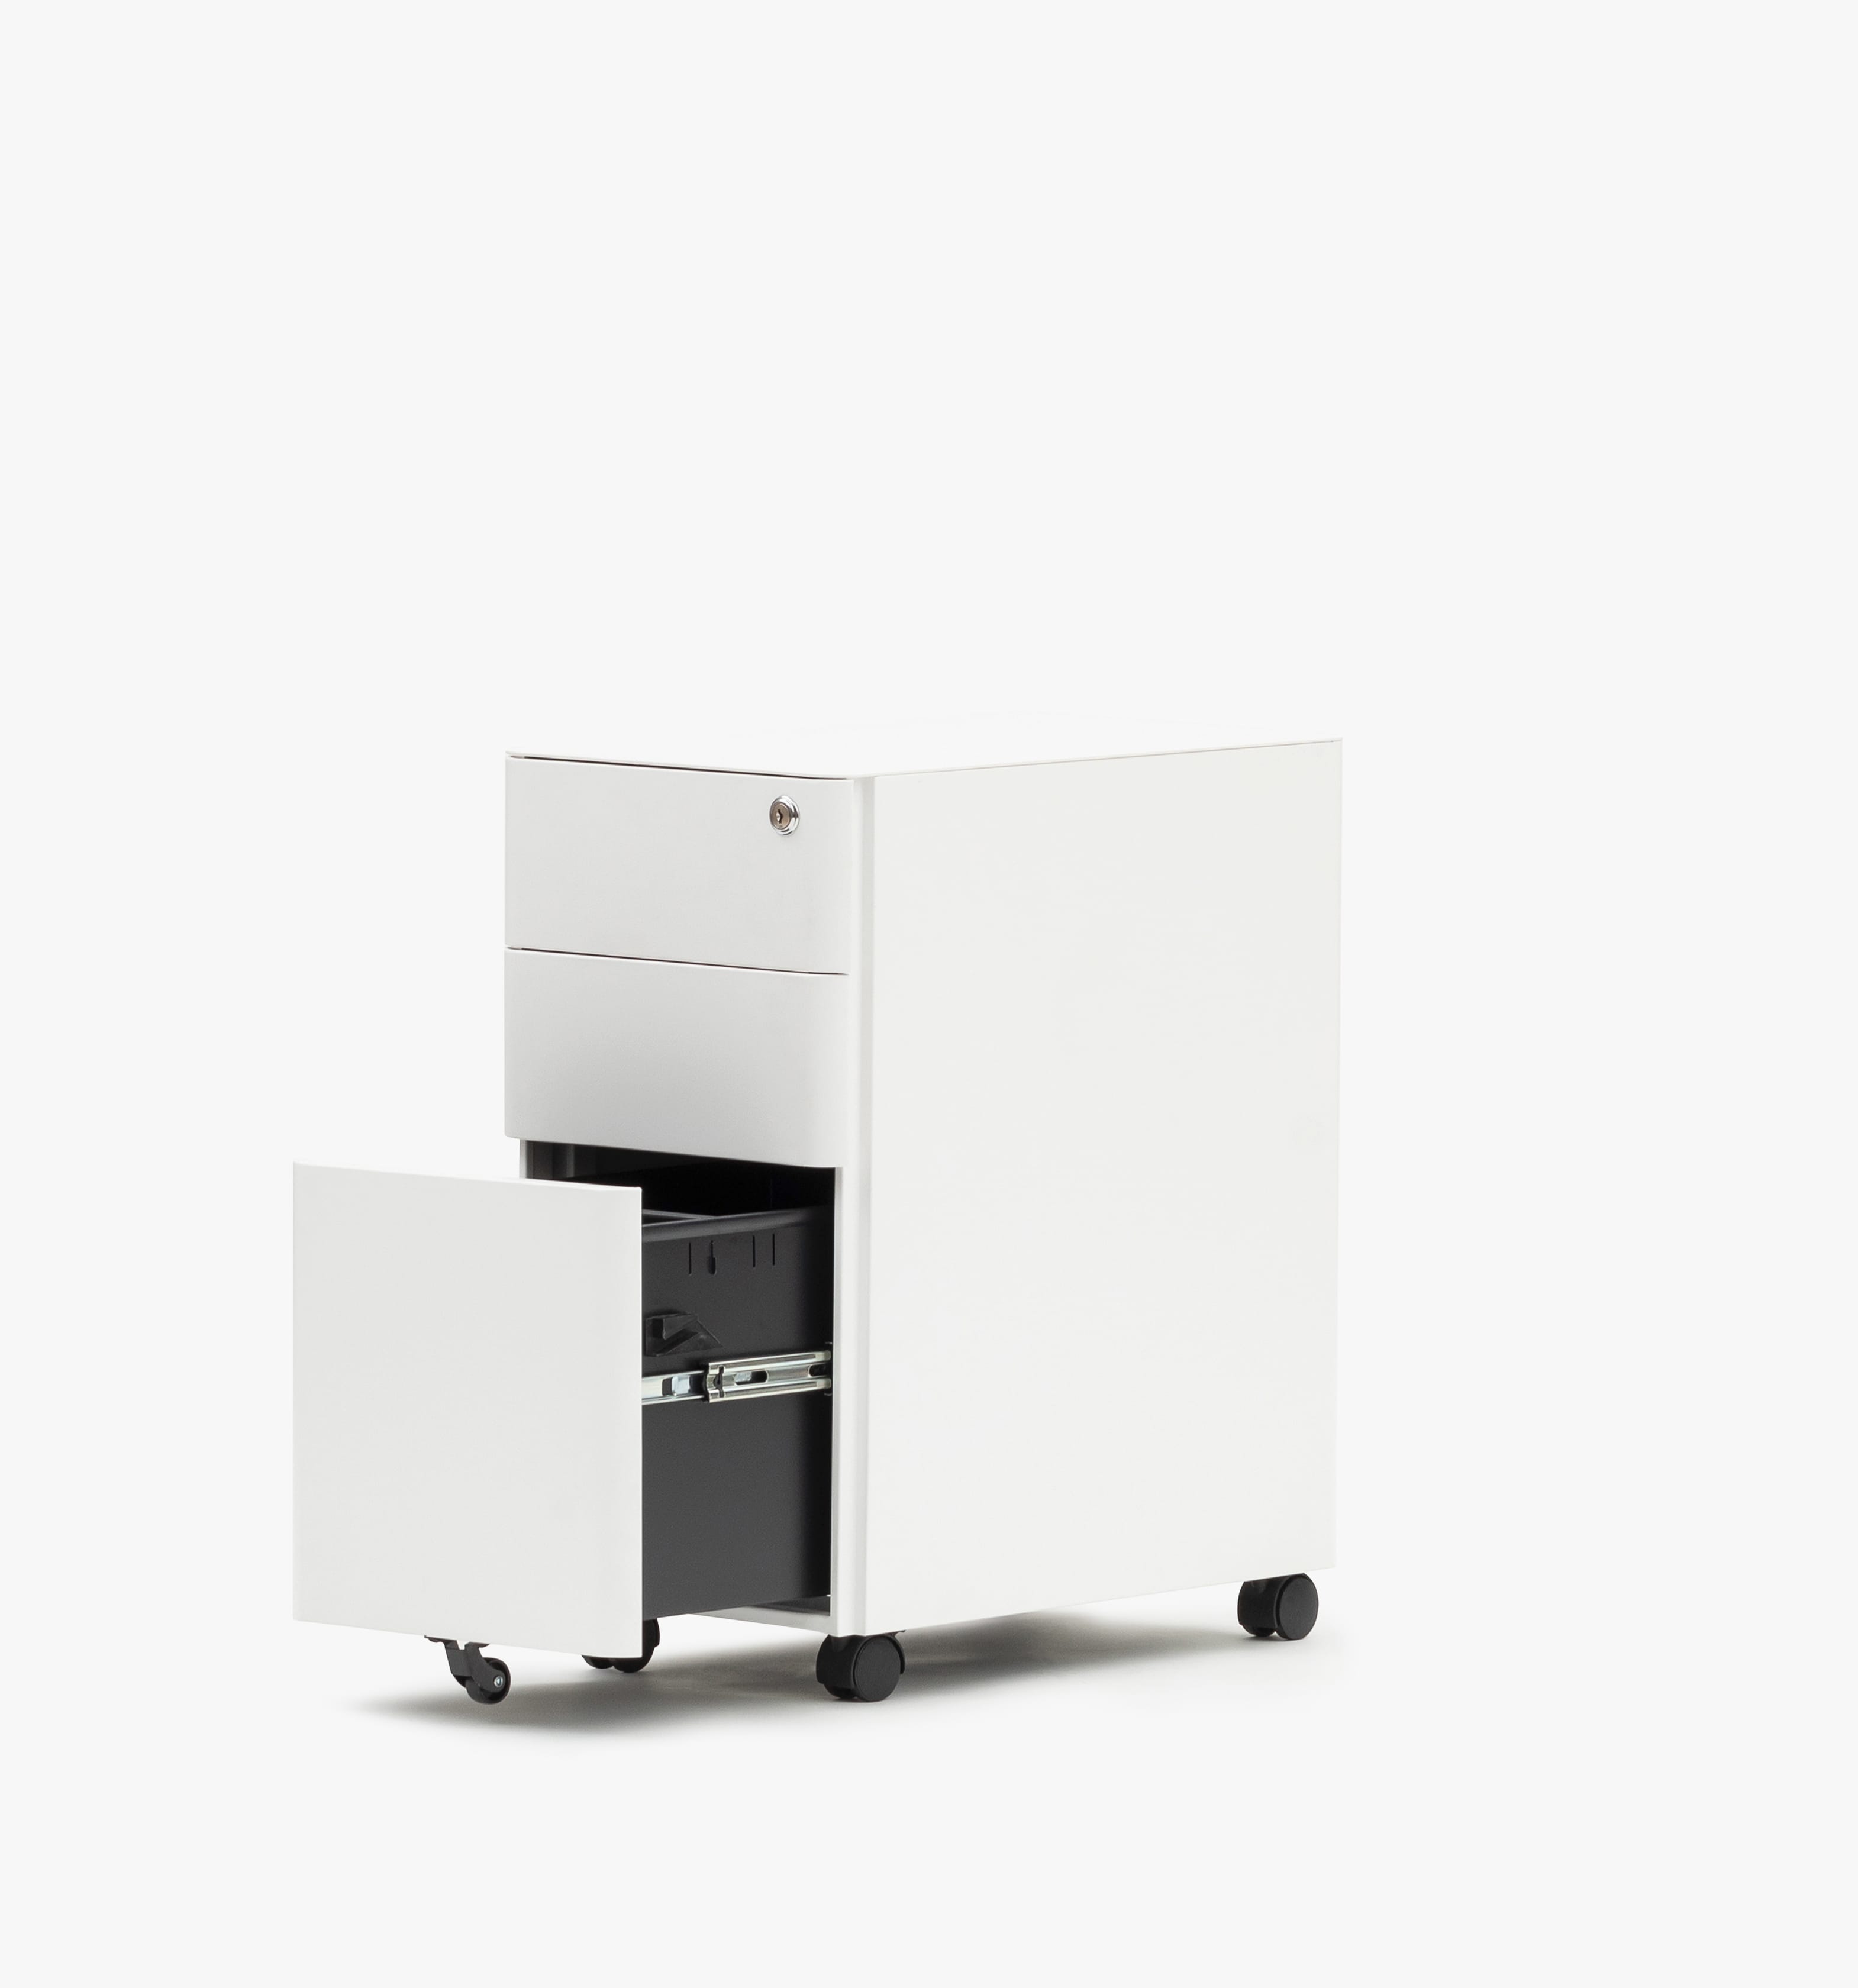 The linea filing cabinet